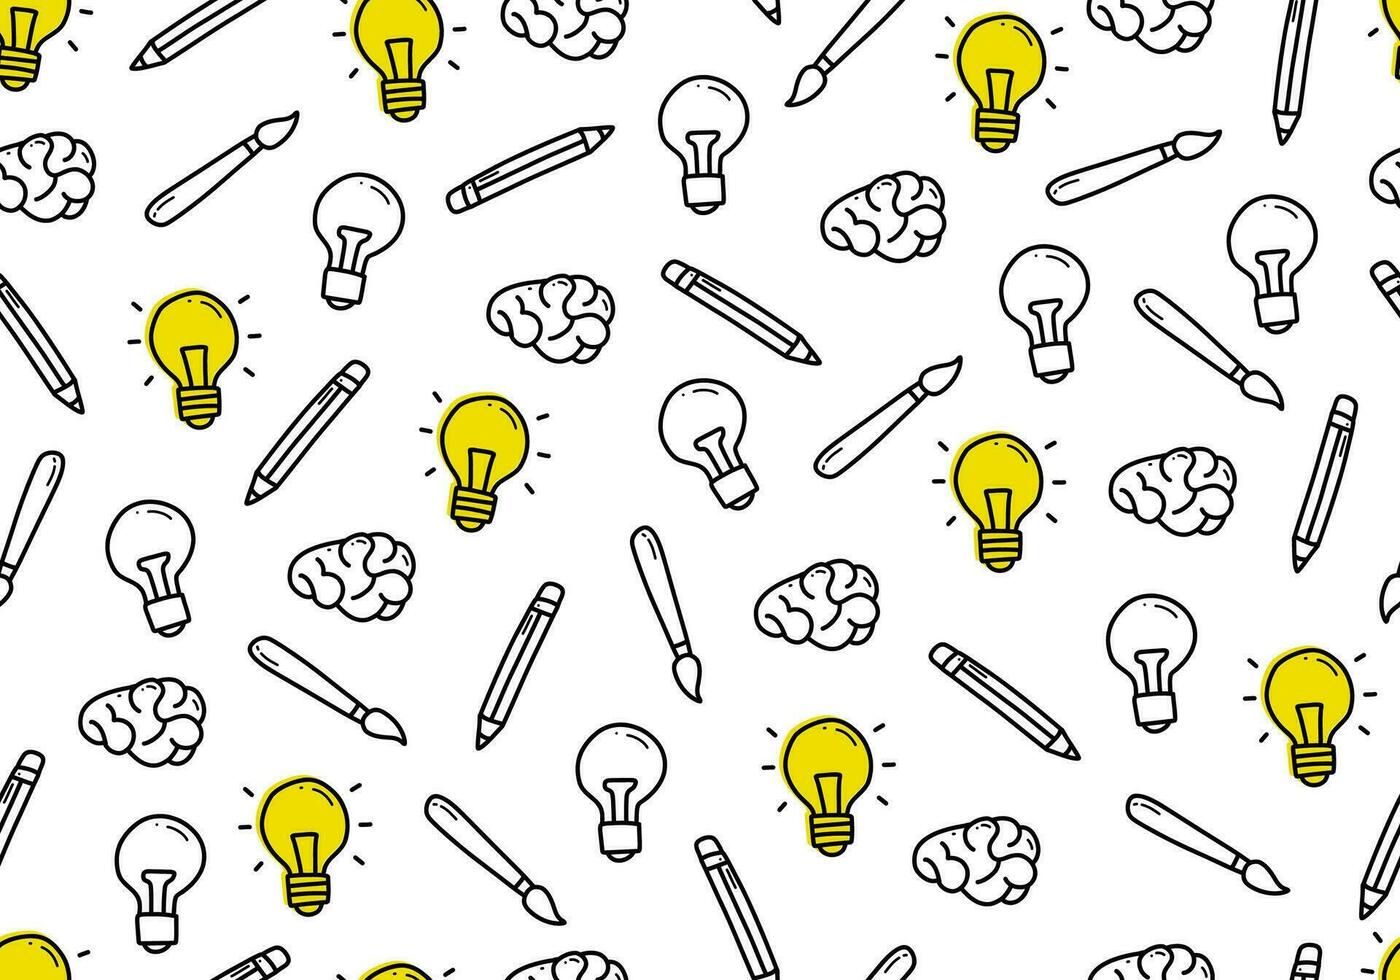 Doodle idea and creativity light bulb and brain outline icon seamless pattern backdrop. vector background pattern for study, education or school design project